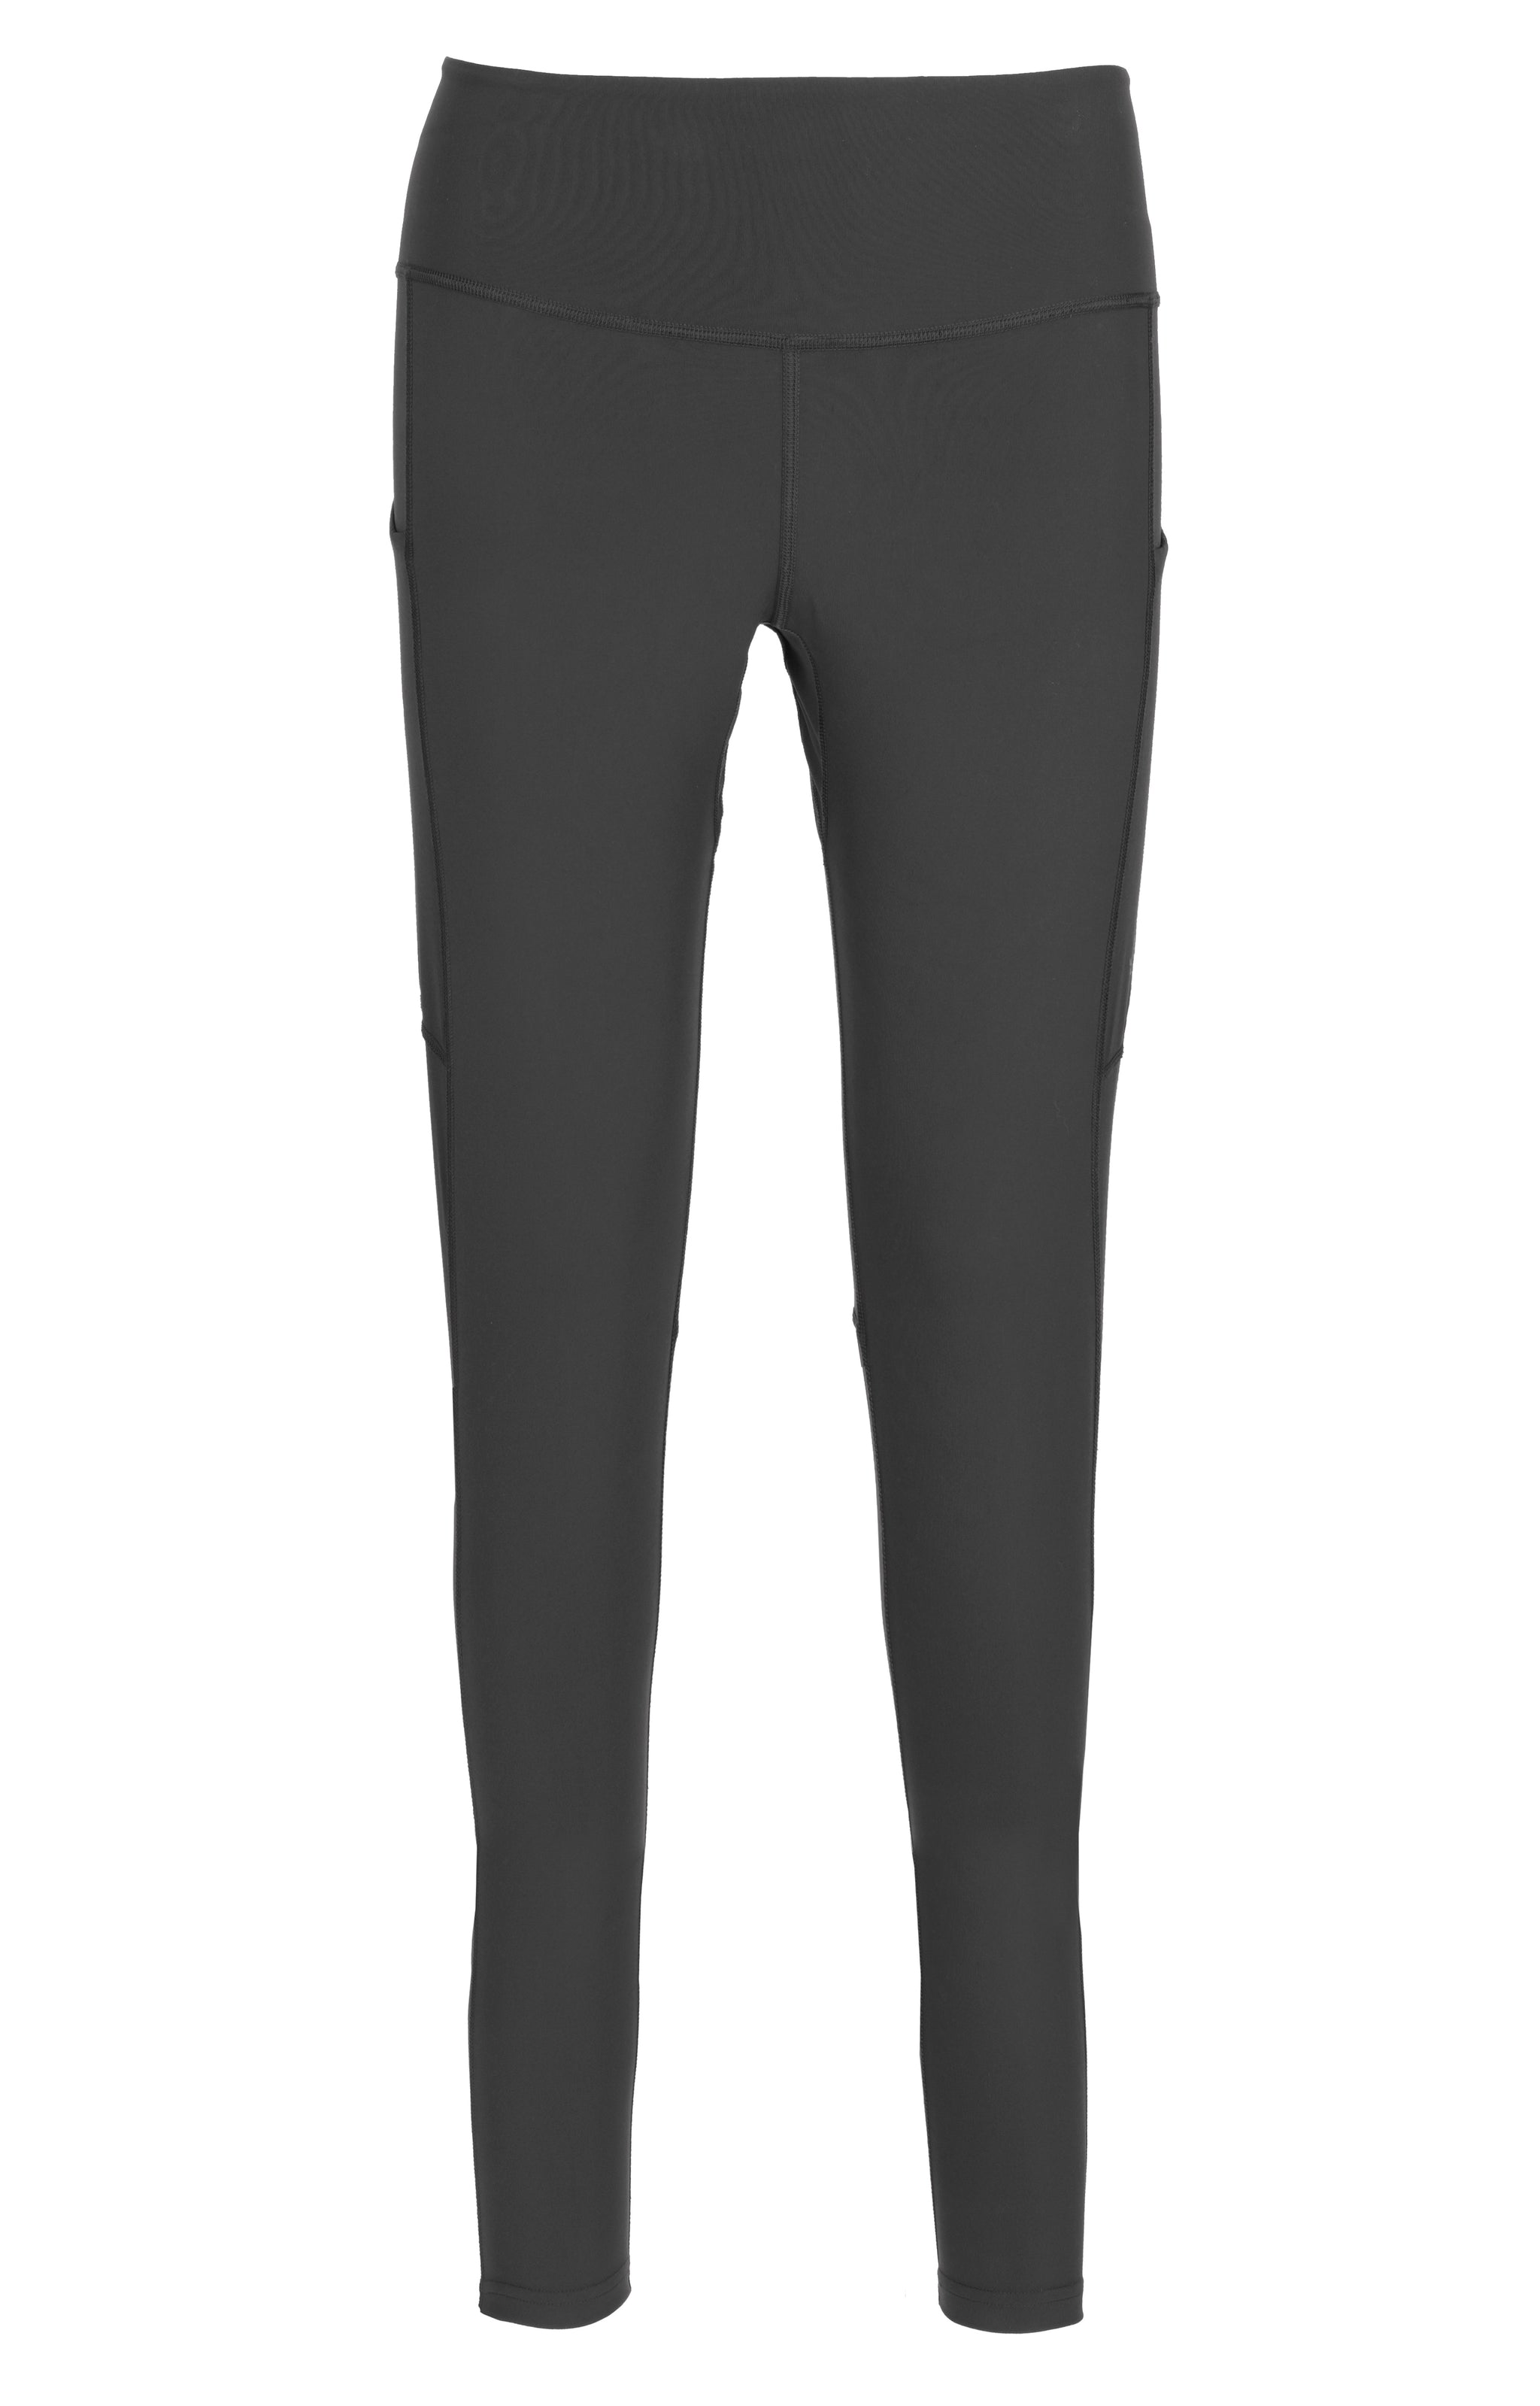 Rab Talus Tights 3/4 - Women's • Wanderlust Outfitters™